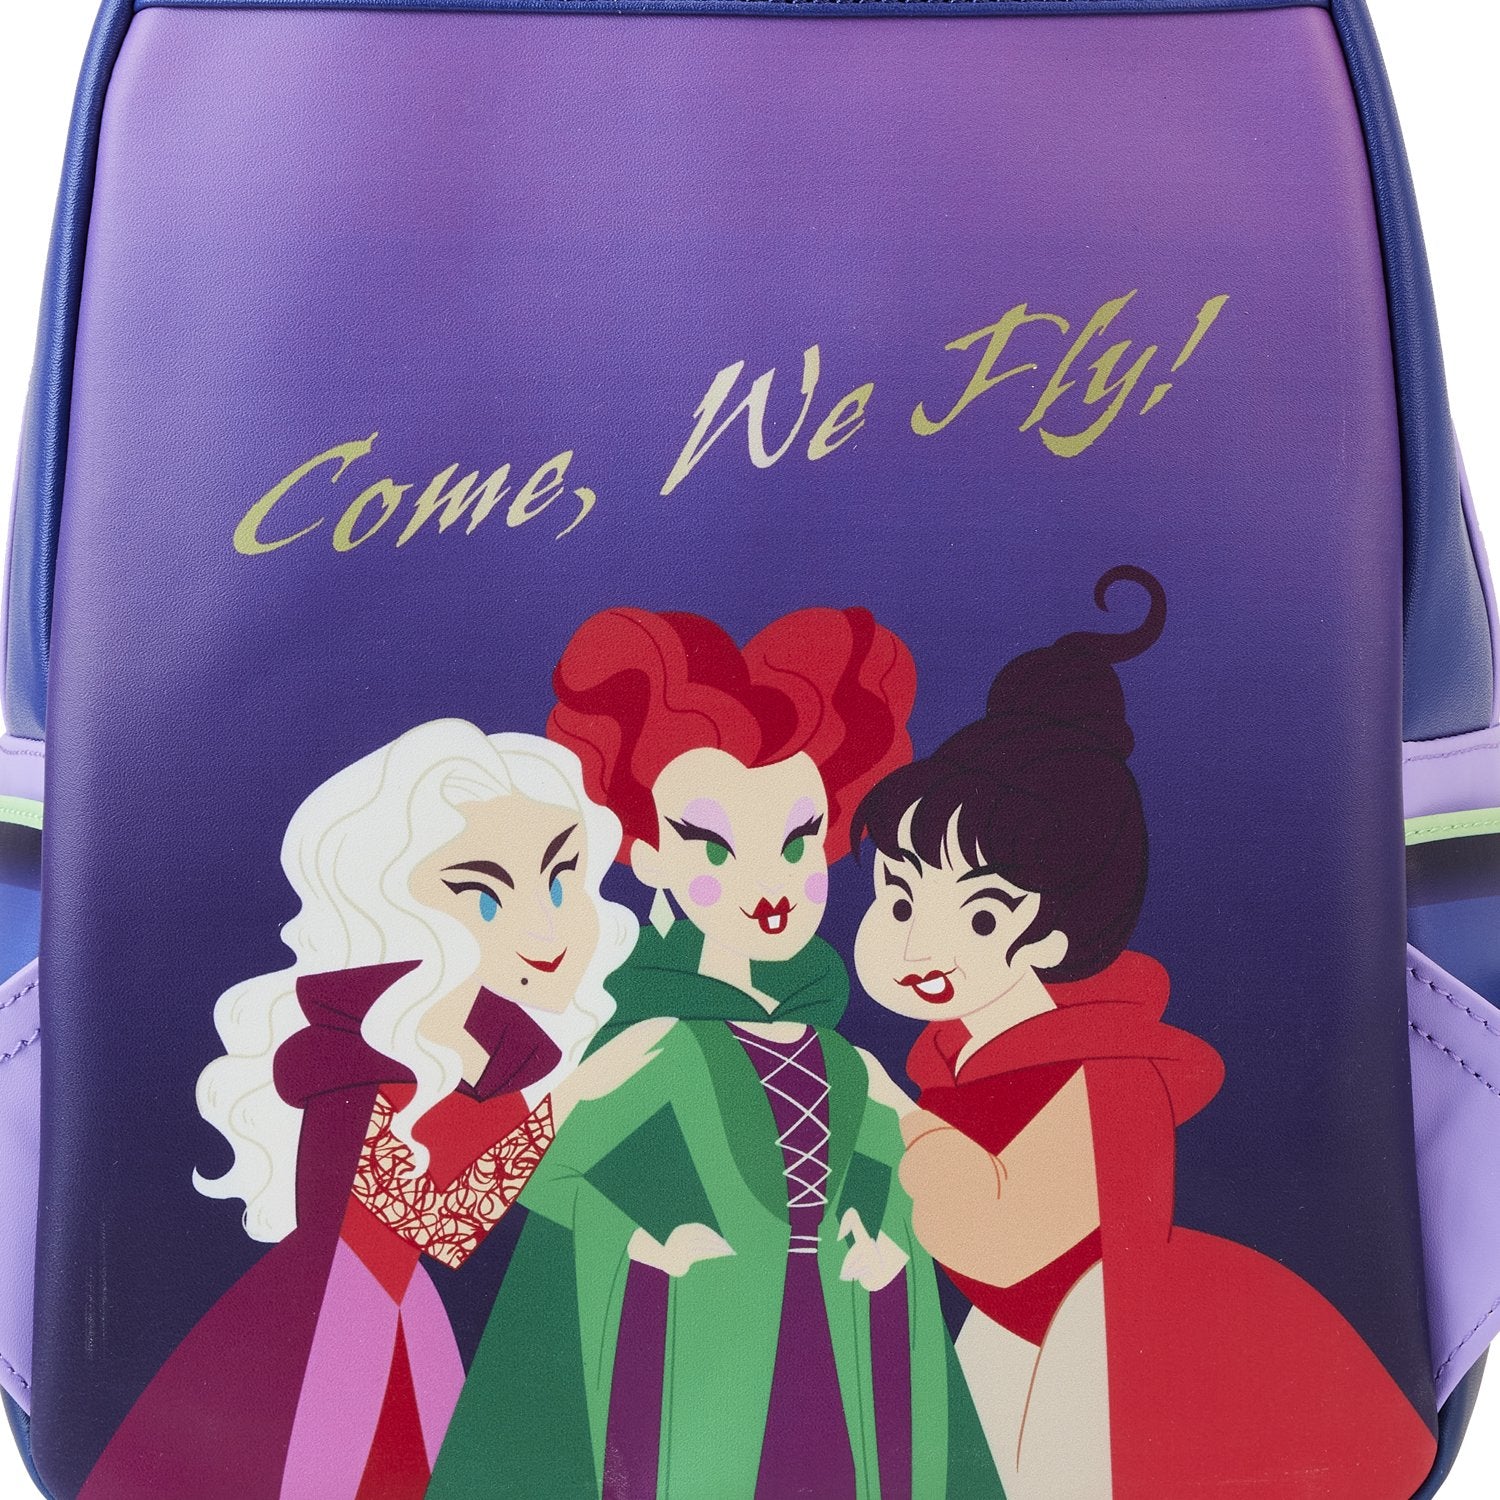 Disney Maleficent Backpack Bag Loungefly Cosplay Witch Queen